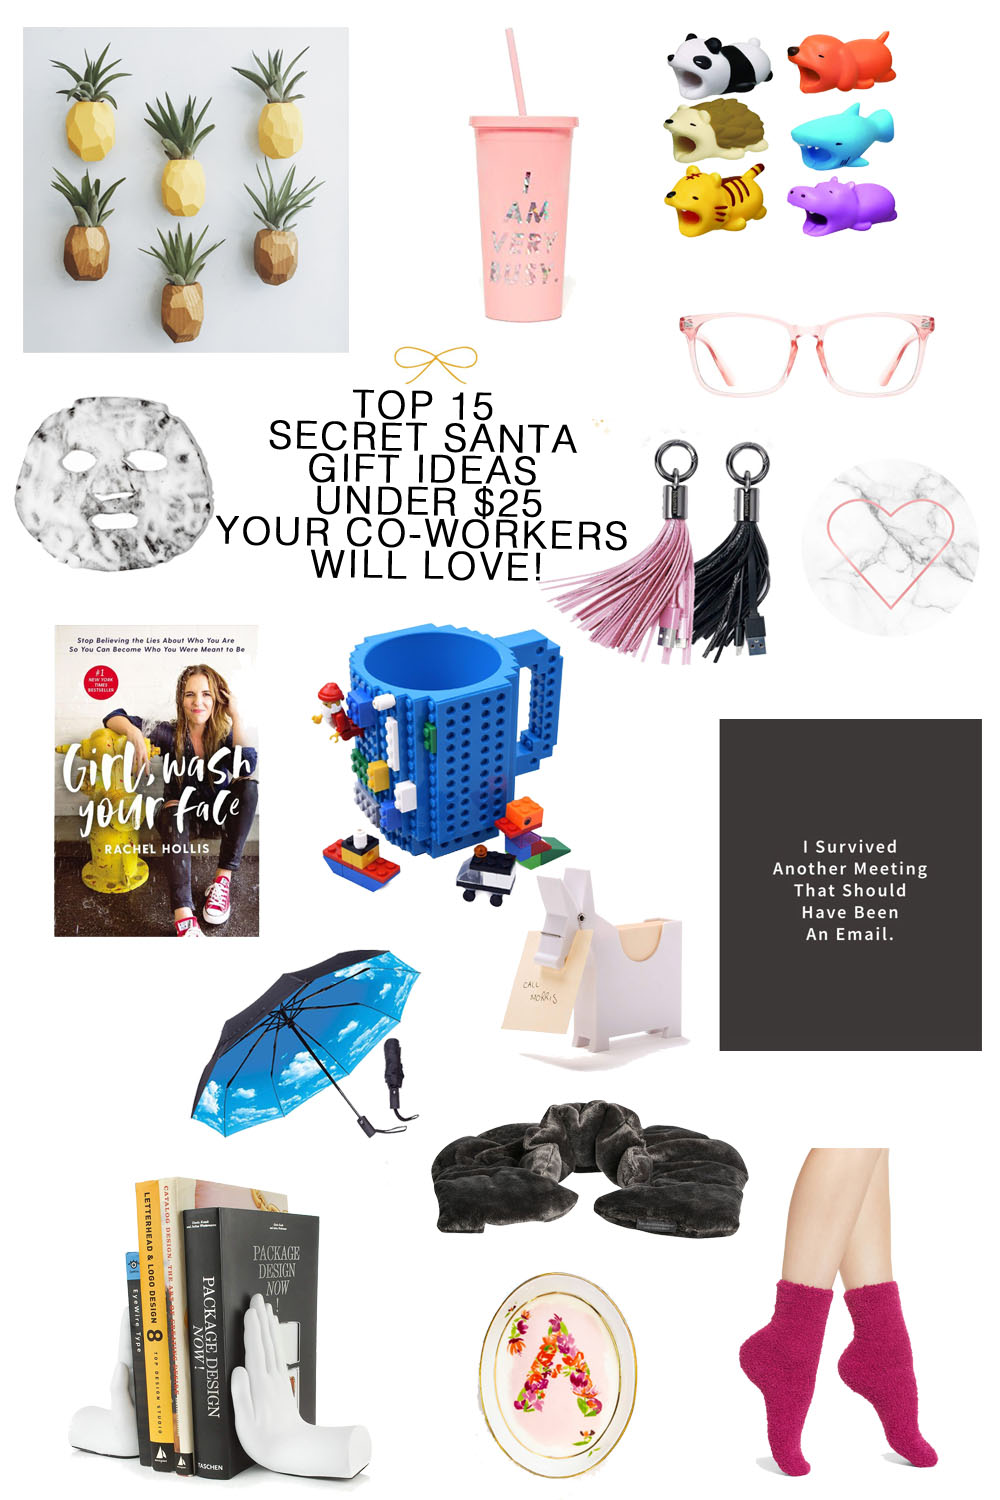 The 15 Best Gift Ideas for Secret Santa for Your Co-Workers! // #holiday #giftideas #giftguide #officeparty - Top 15 Secret Santa Gift Ideas Your Co-Workers Will Love featured by top Florida lifestyle blogger, The Modern Savvy